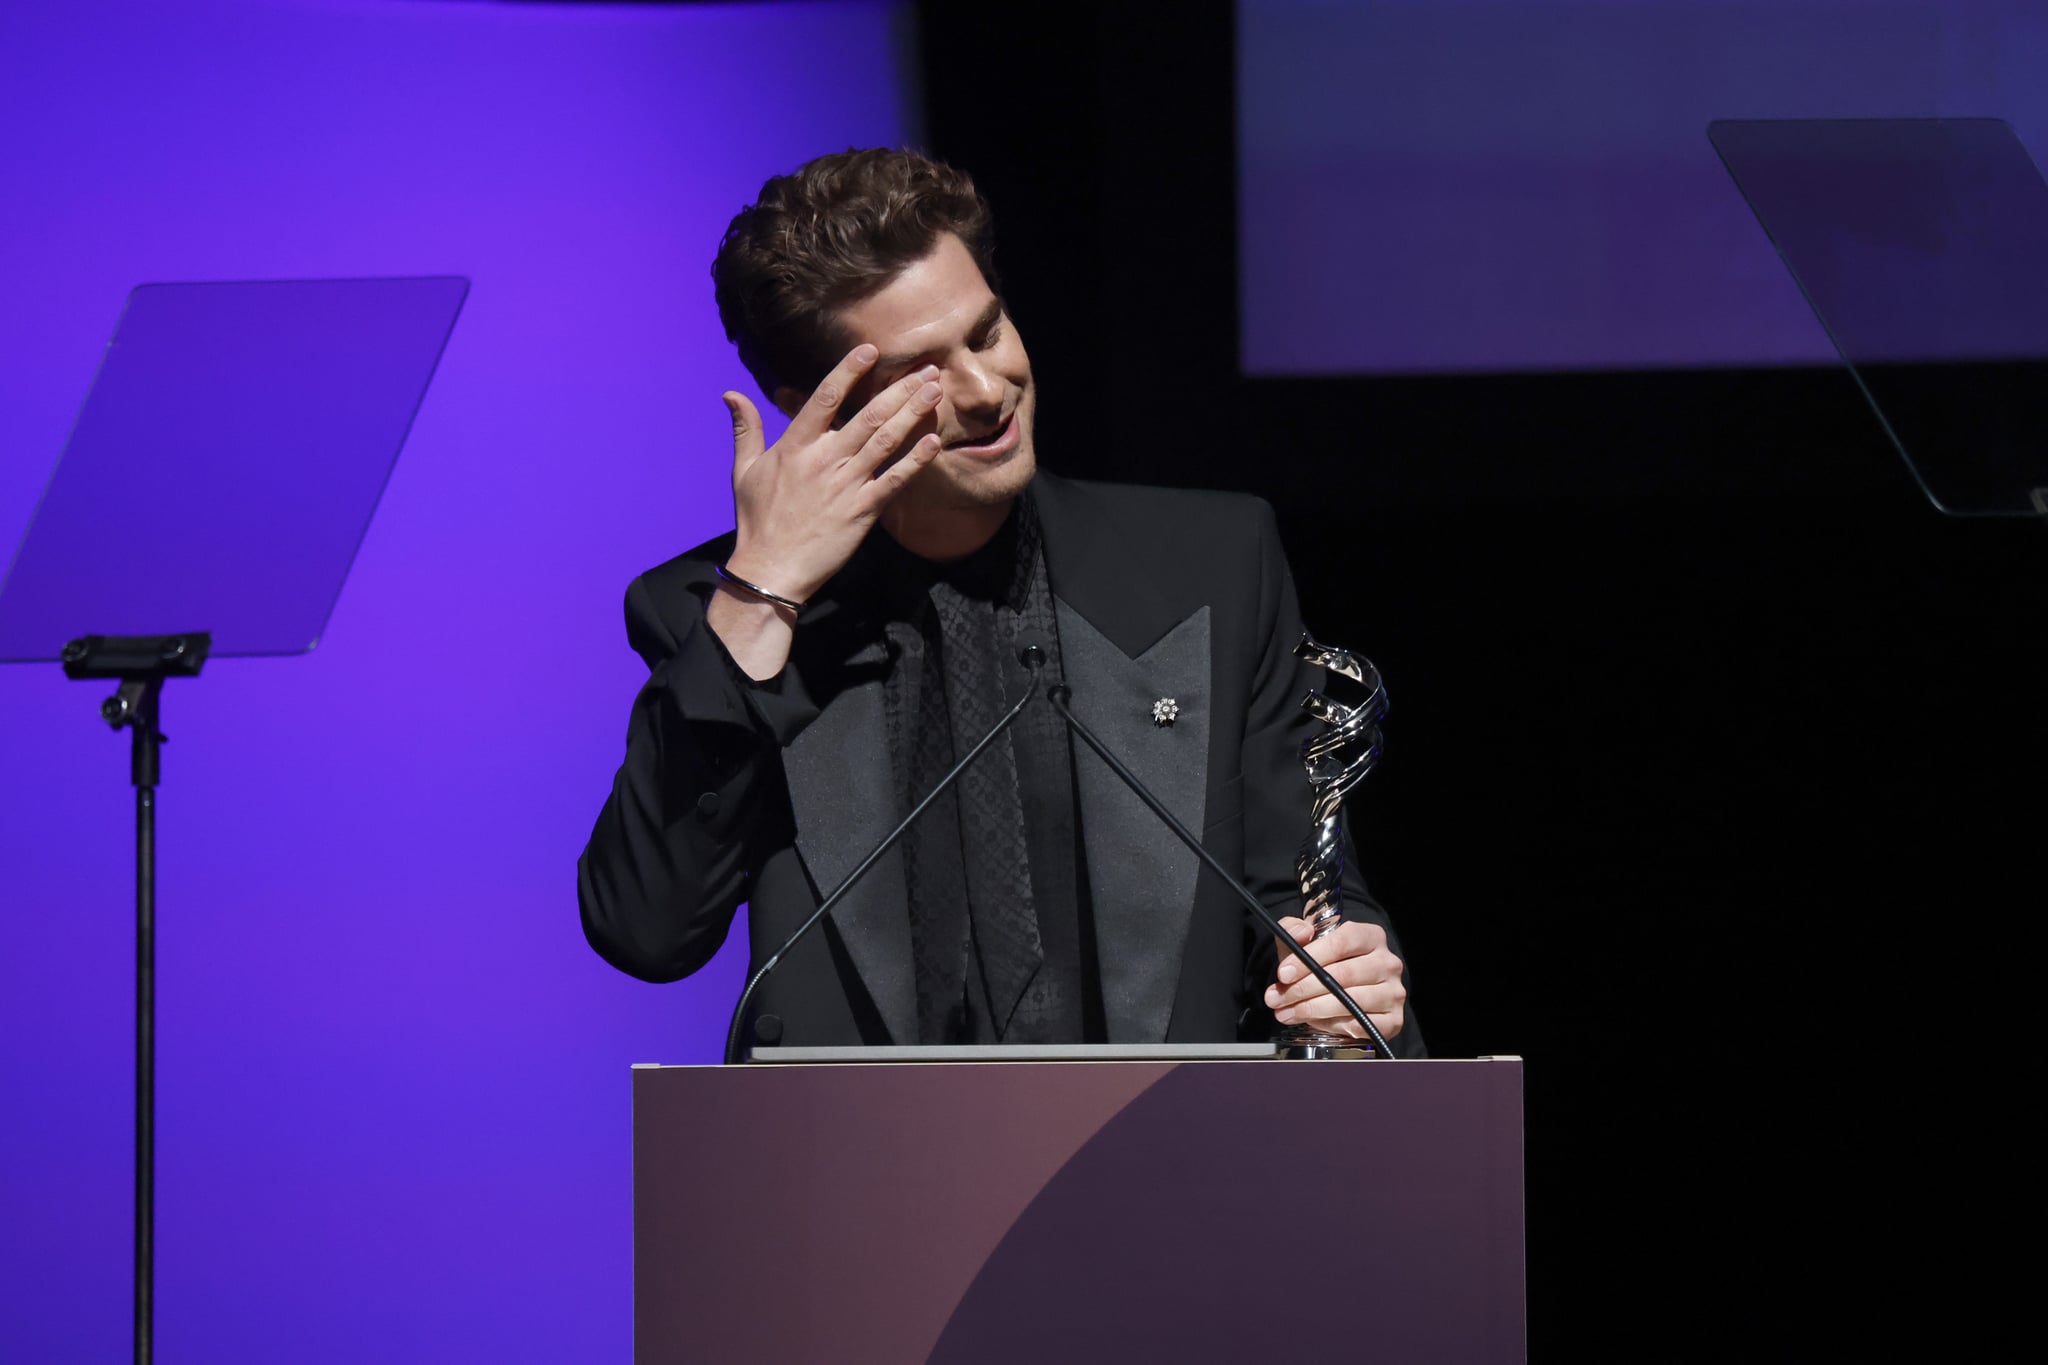 SANTA MONICA, CALIFORNIA - MARCH 09: Andrew Garfield is seen onstage during the 24th CDGA (Costume Designers Guild Awards) on March 09, 2022 in Santa Monica, California. (Photo by Frazer Harrison/Getty Images)